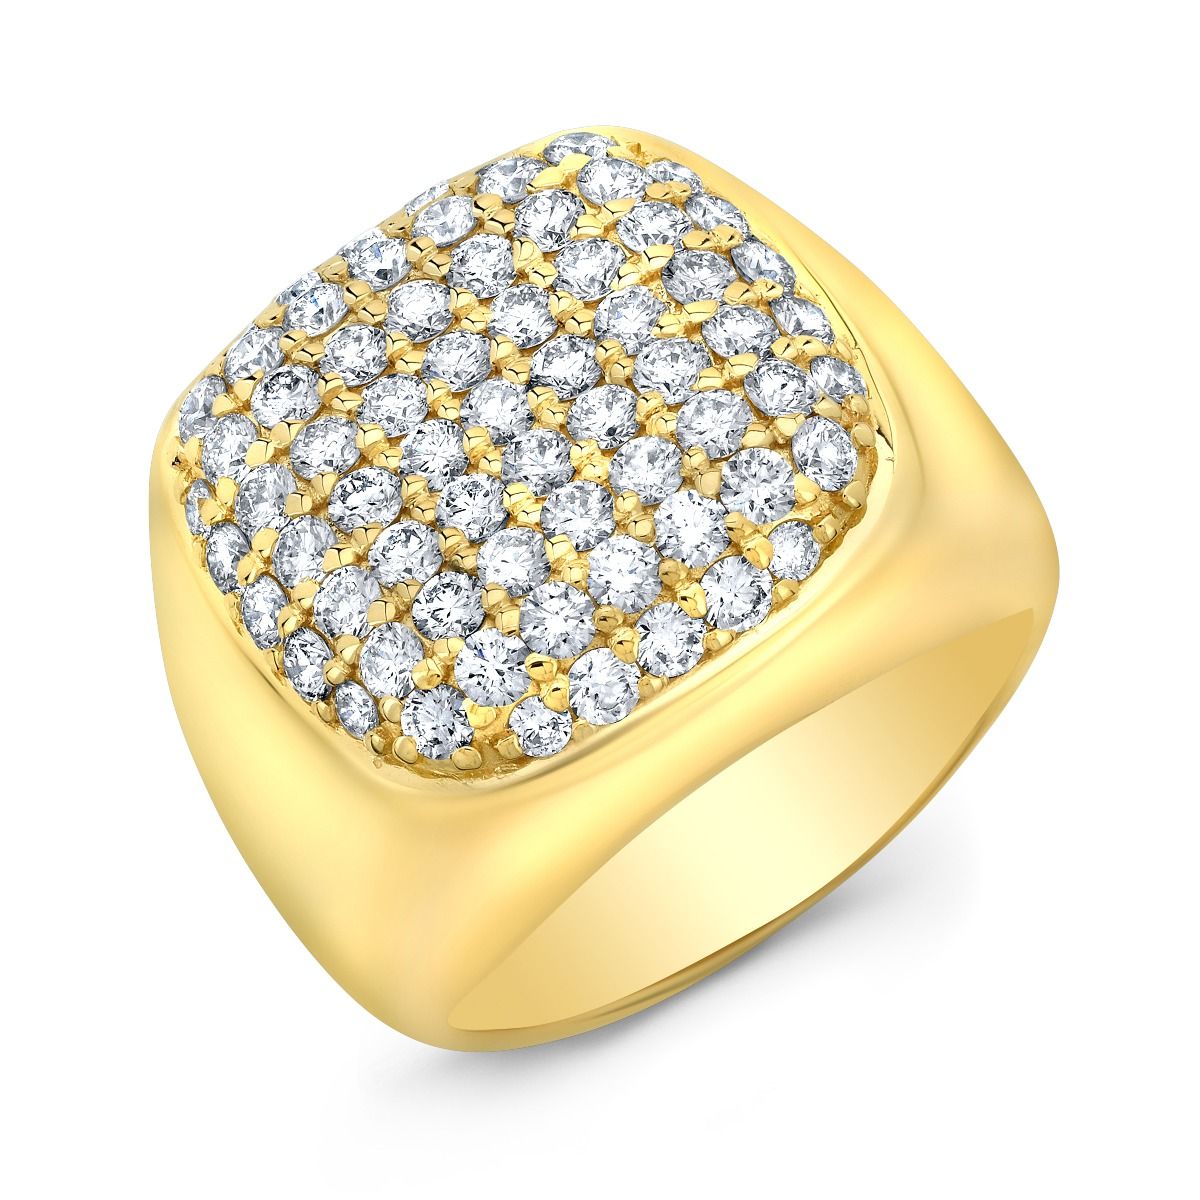 Mens Diamond Rings in 18K Gold -VVS Clarity E-F Color -Indian Gold Jewelry  -Buy Online